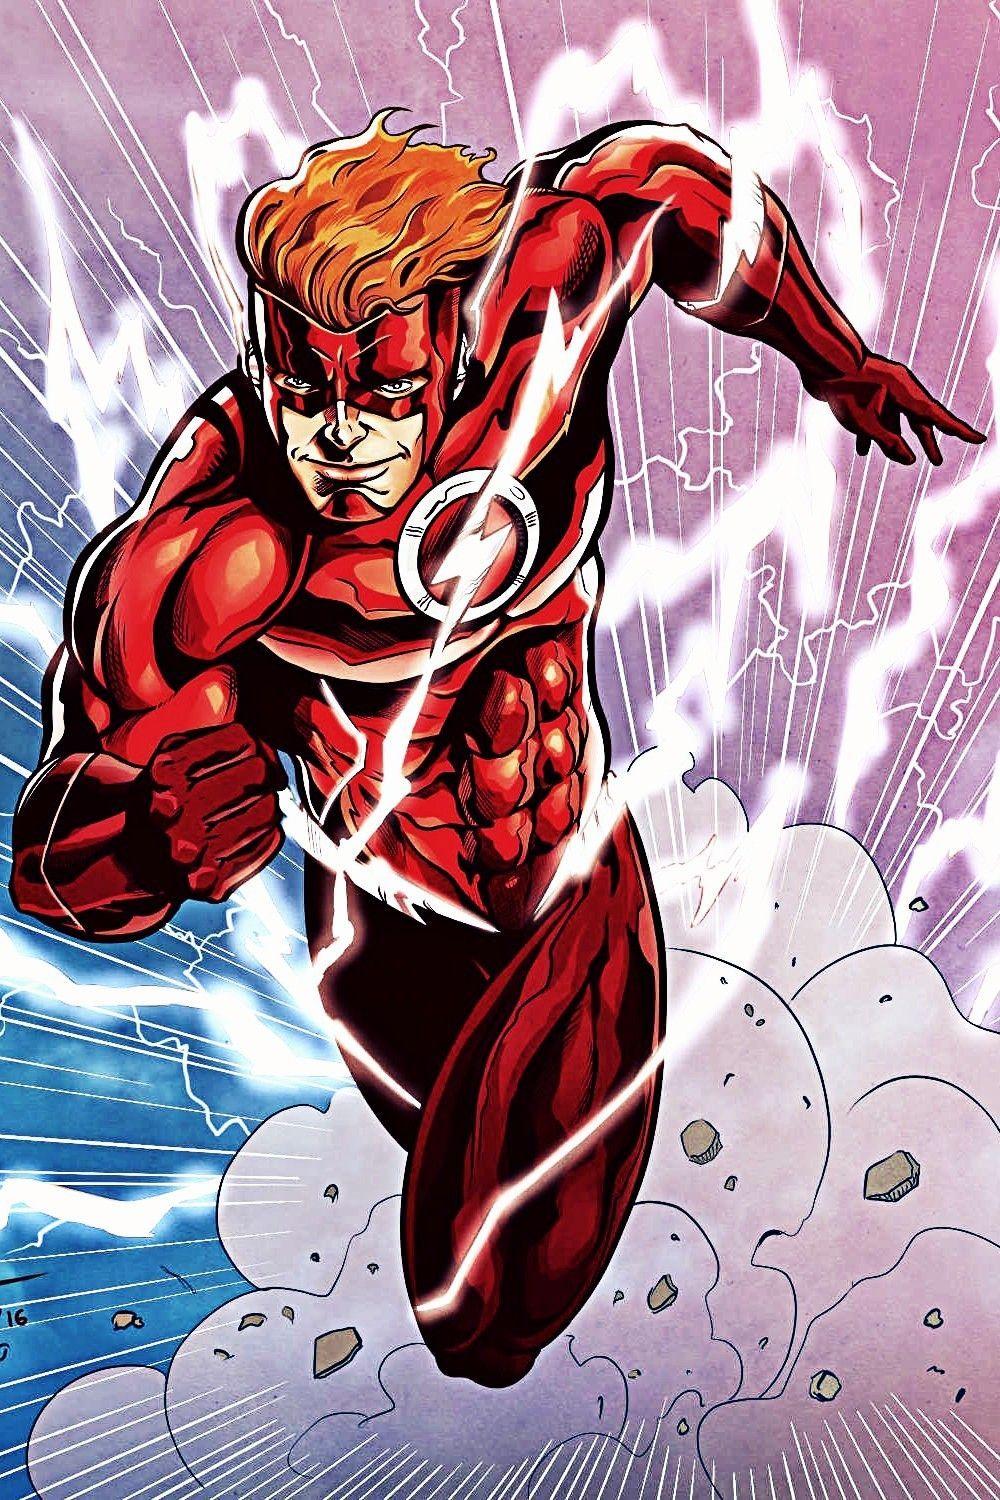 Wally West Rebirth Wallpapers - Top Free Wally West Rebirth Backgrounds ...